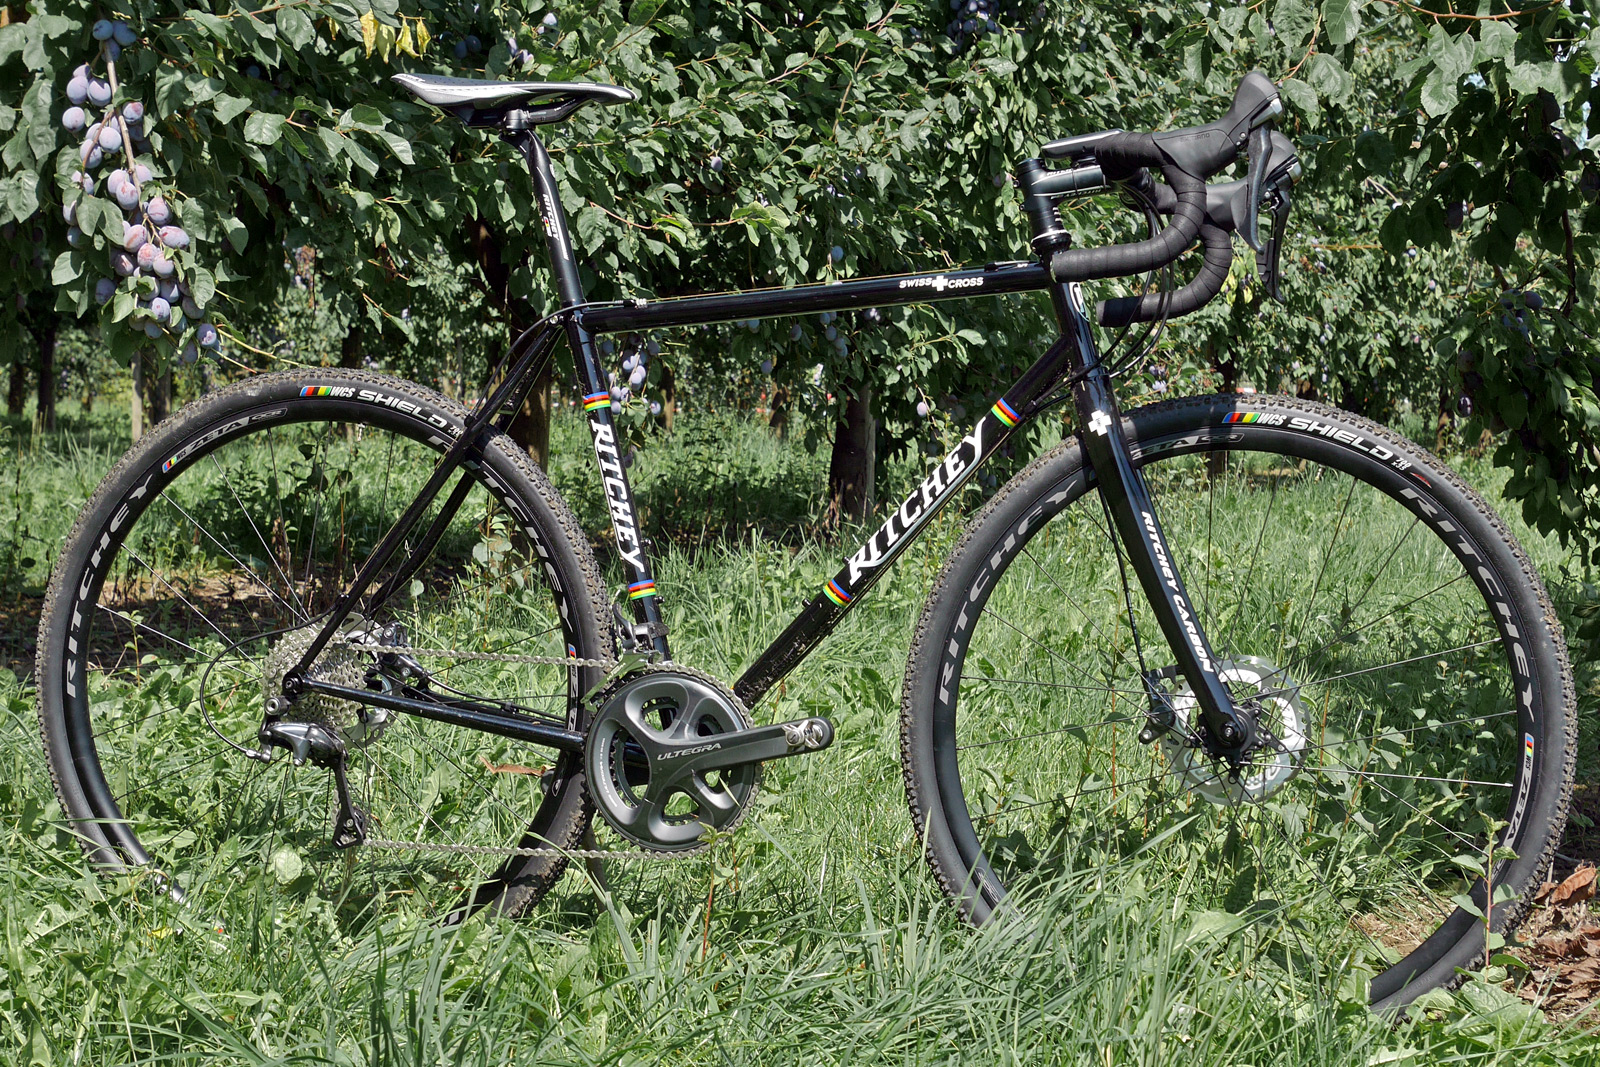 One Ride Review: Ritchey Swiss Cross Disc, new Shield tires, EvoMax bar & actual weight